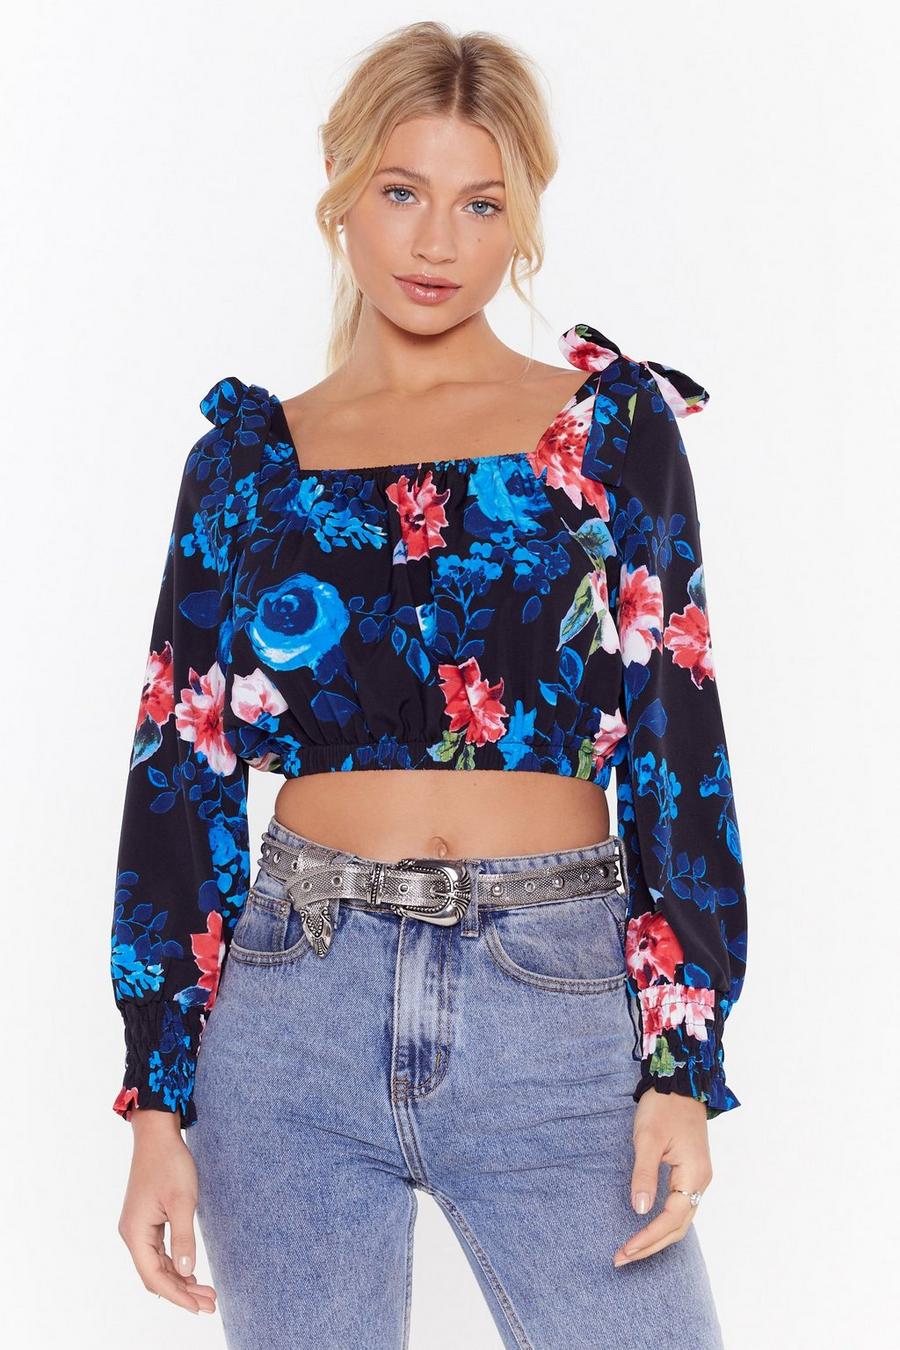 This is Flower Moment Floral Cropped Blouse